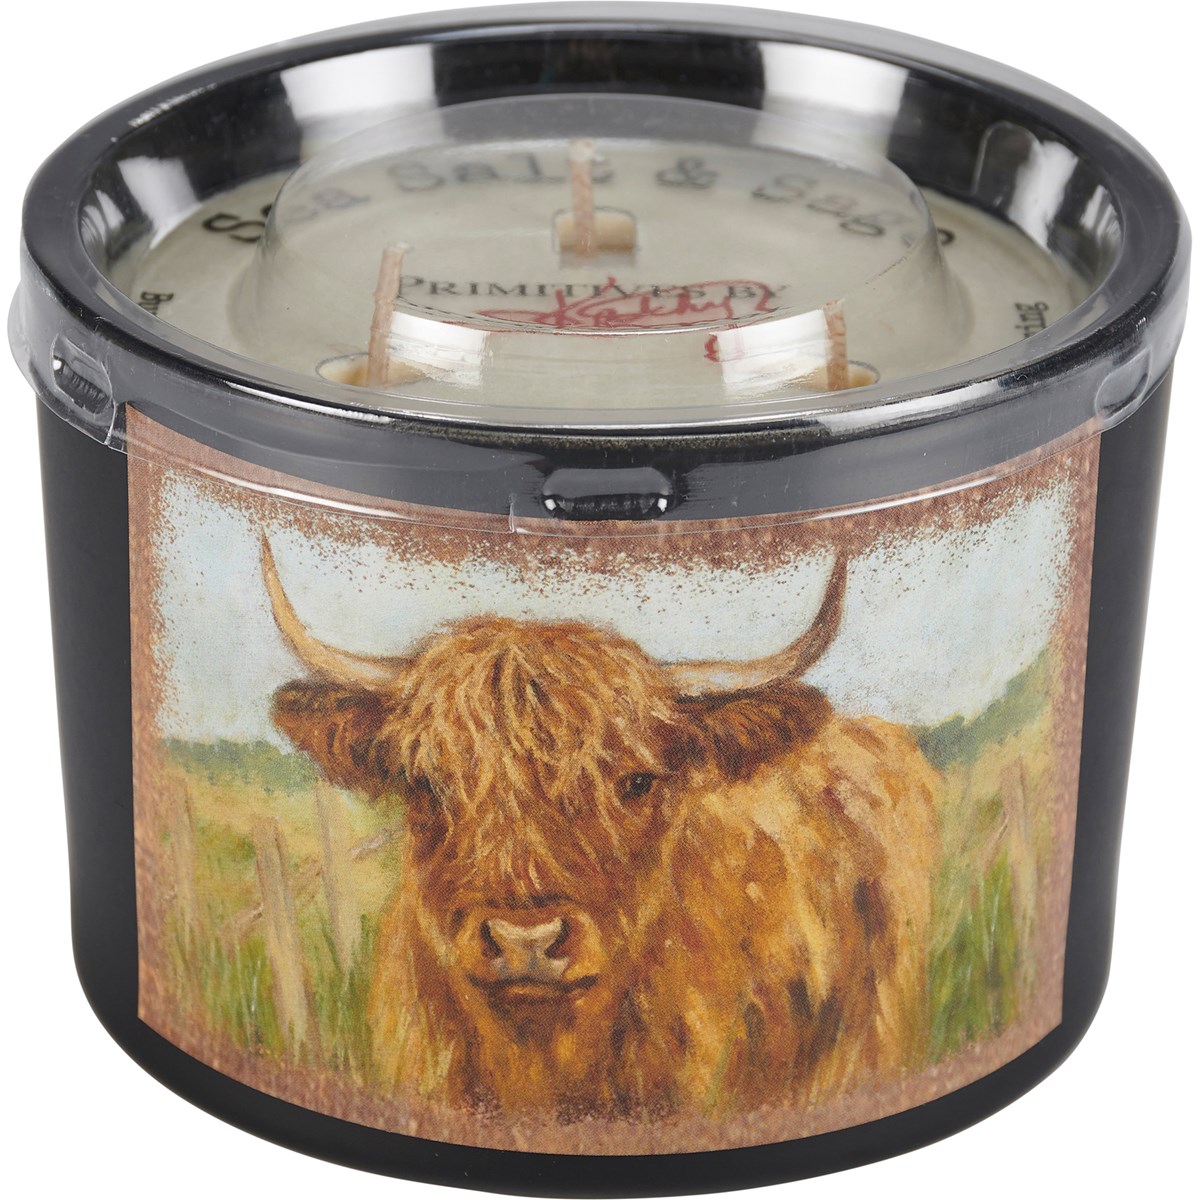 Highland Cow Candle - Soy Wax, Glass, Cotton